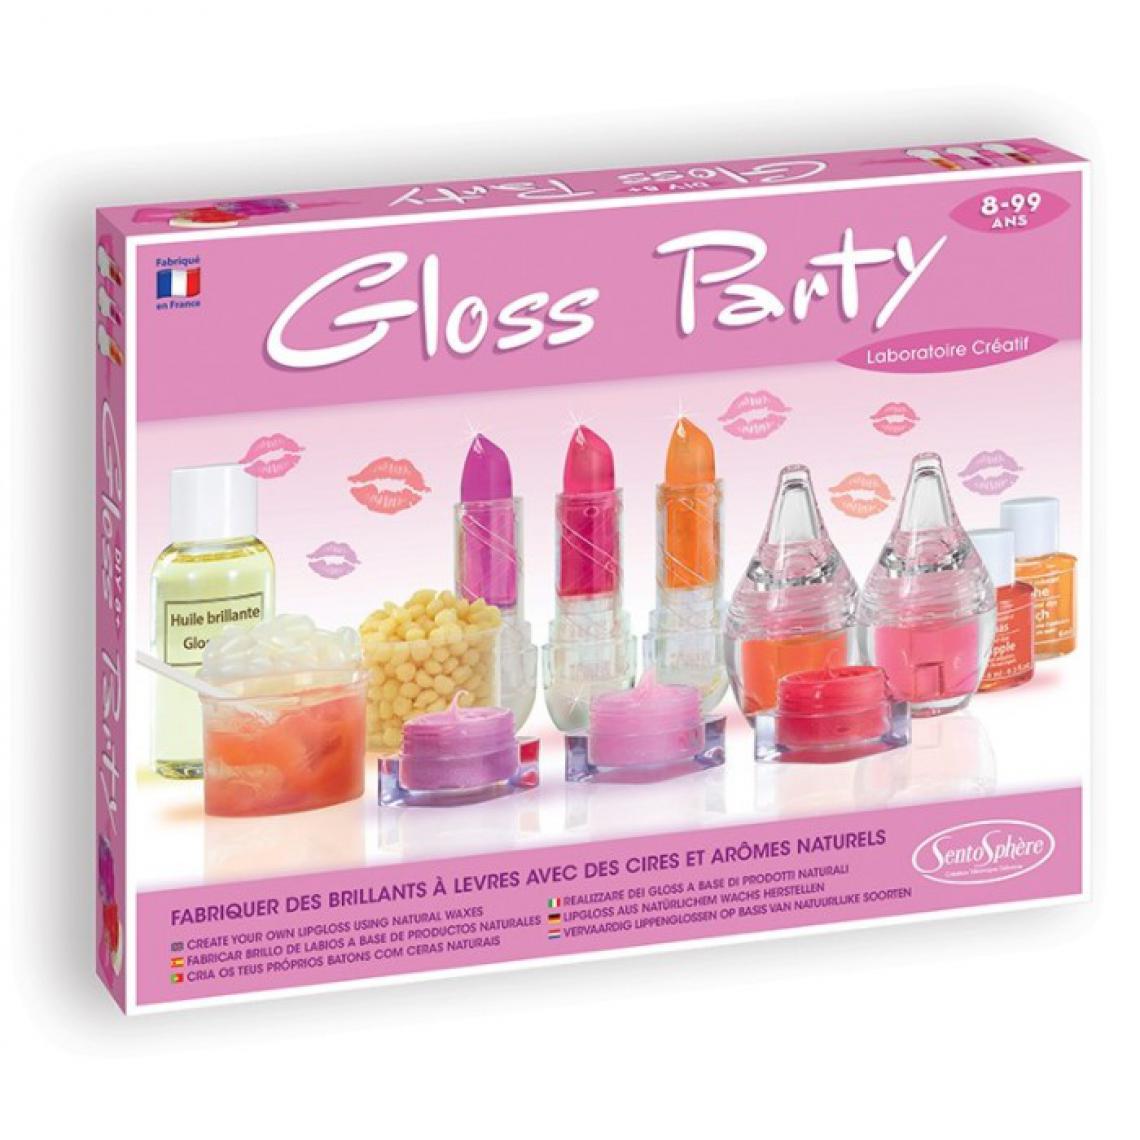 SentoSphere - Gloss party - Maquillage et coiffure